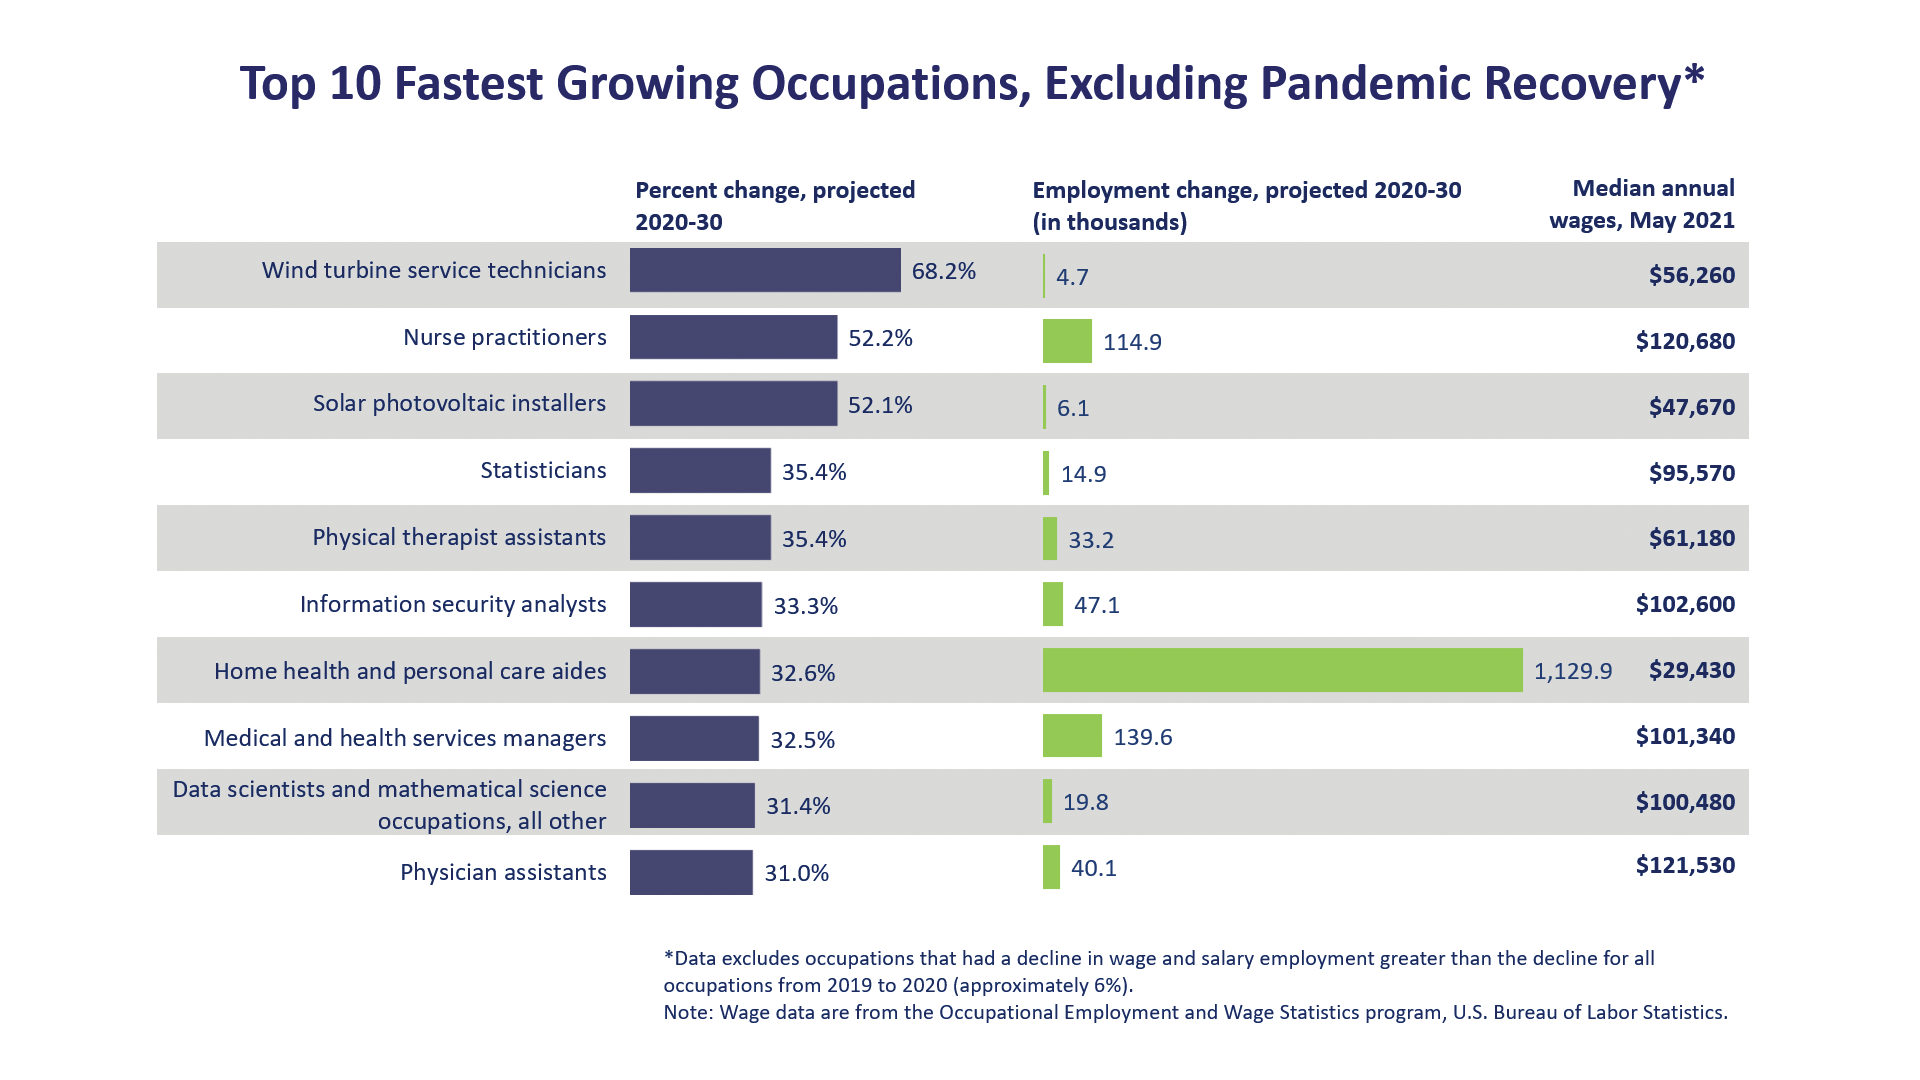 Top 10 fastest growing occupations, excluding pandemic recovery